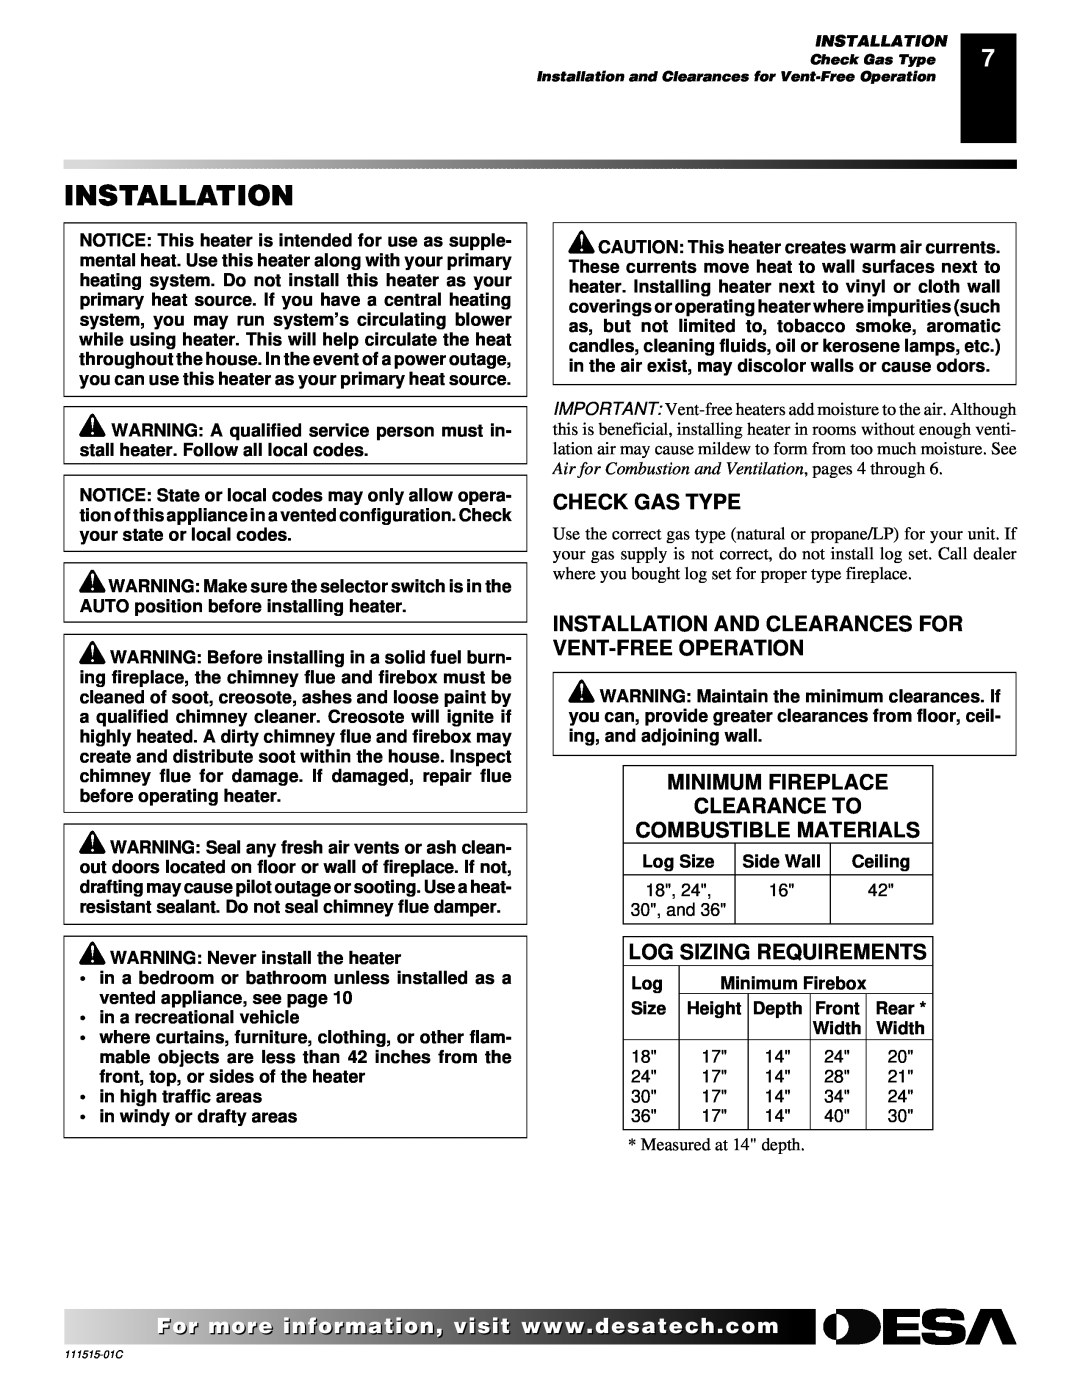 Desa LDL3930NR, LDL3930PR, LDL3924PR Installation, Check Gas Type, Minimum Fireplace Clearance To, Combustible Materials 